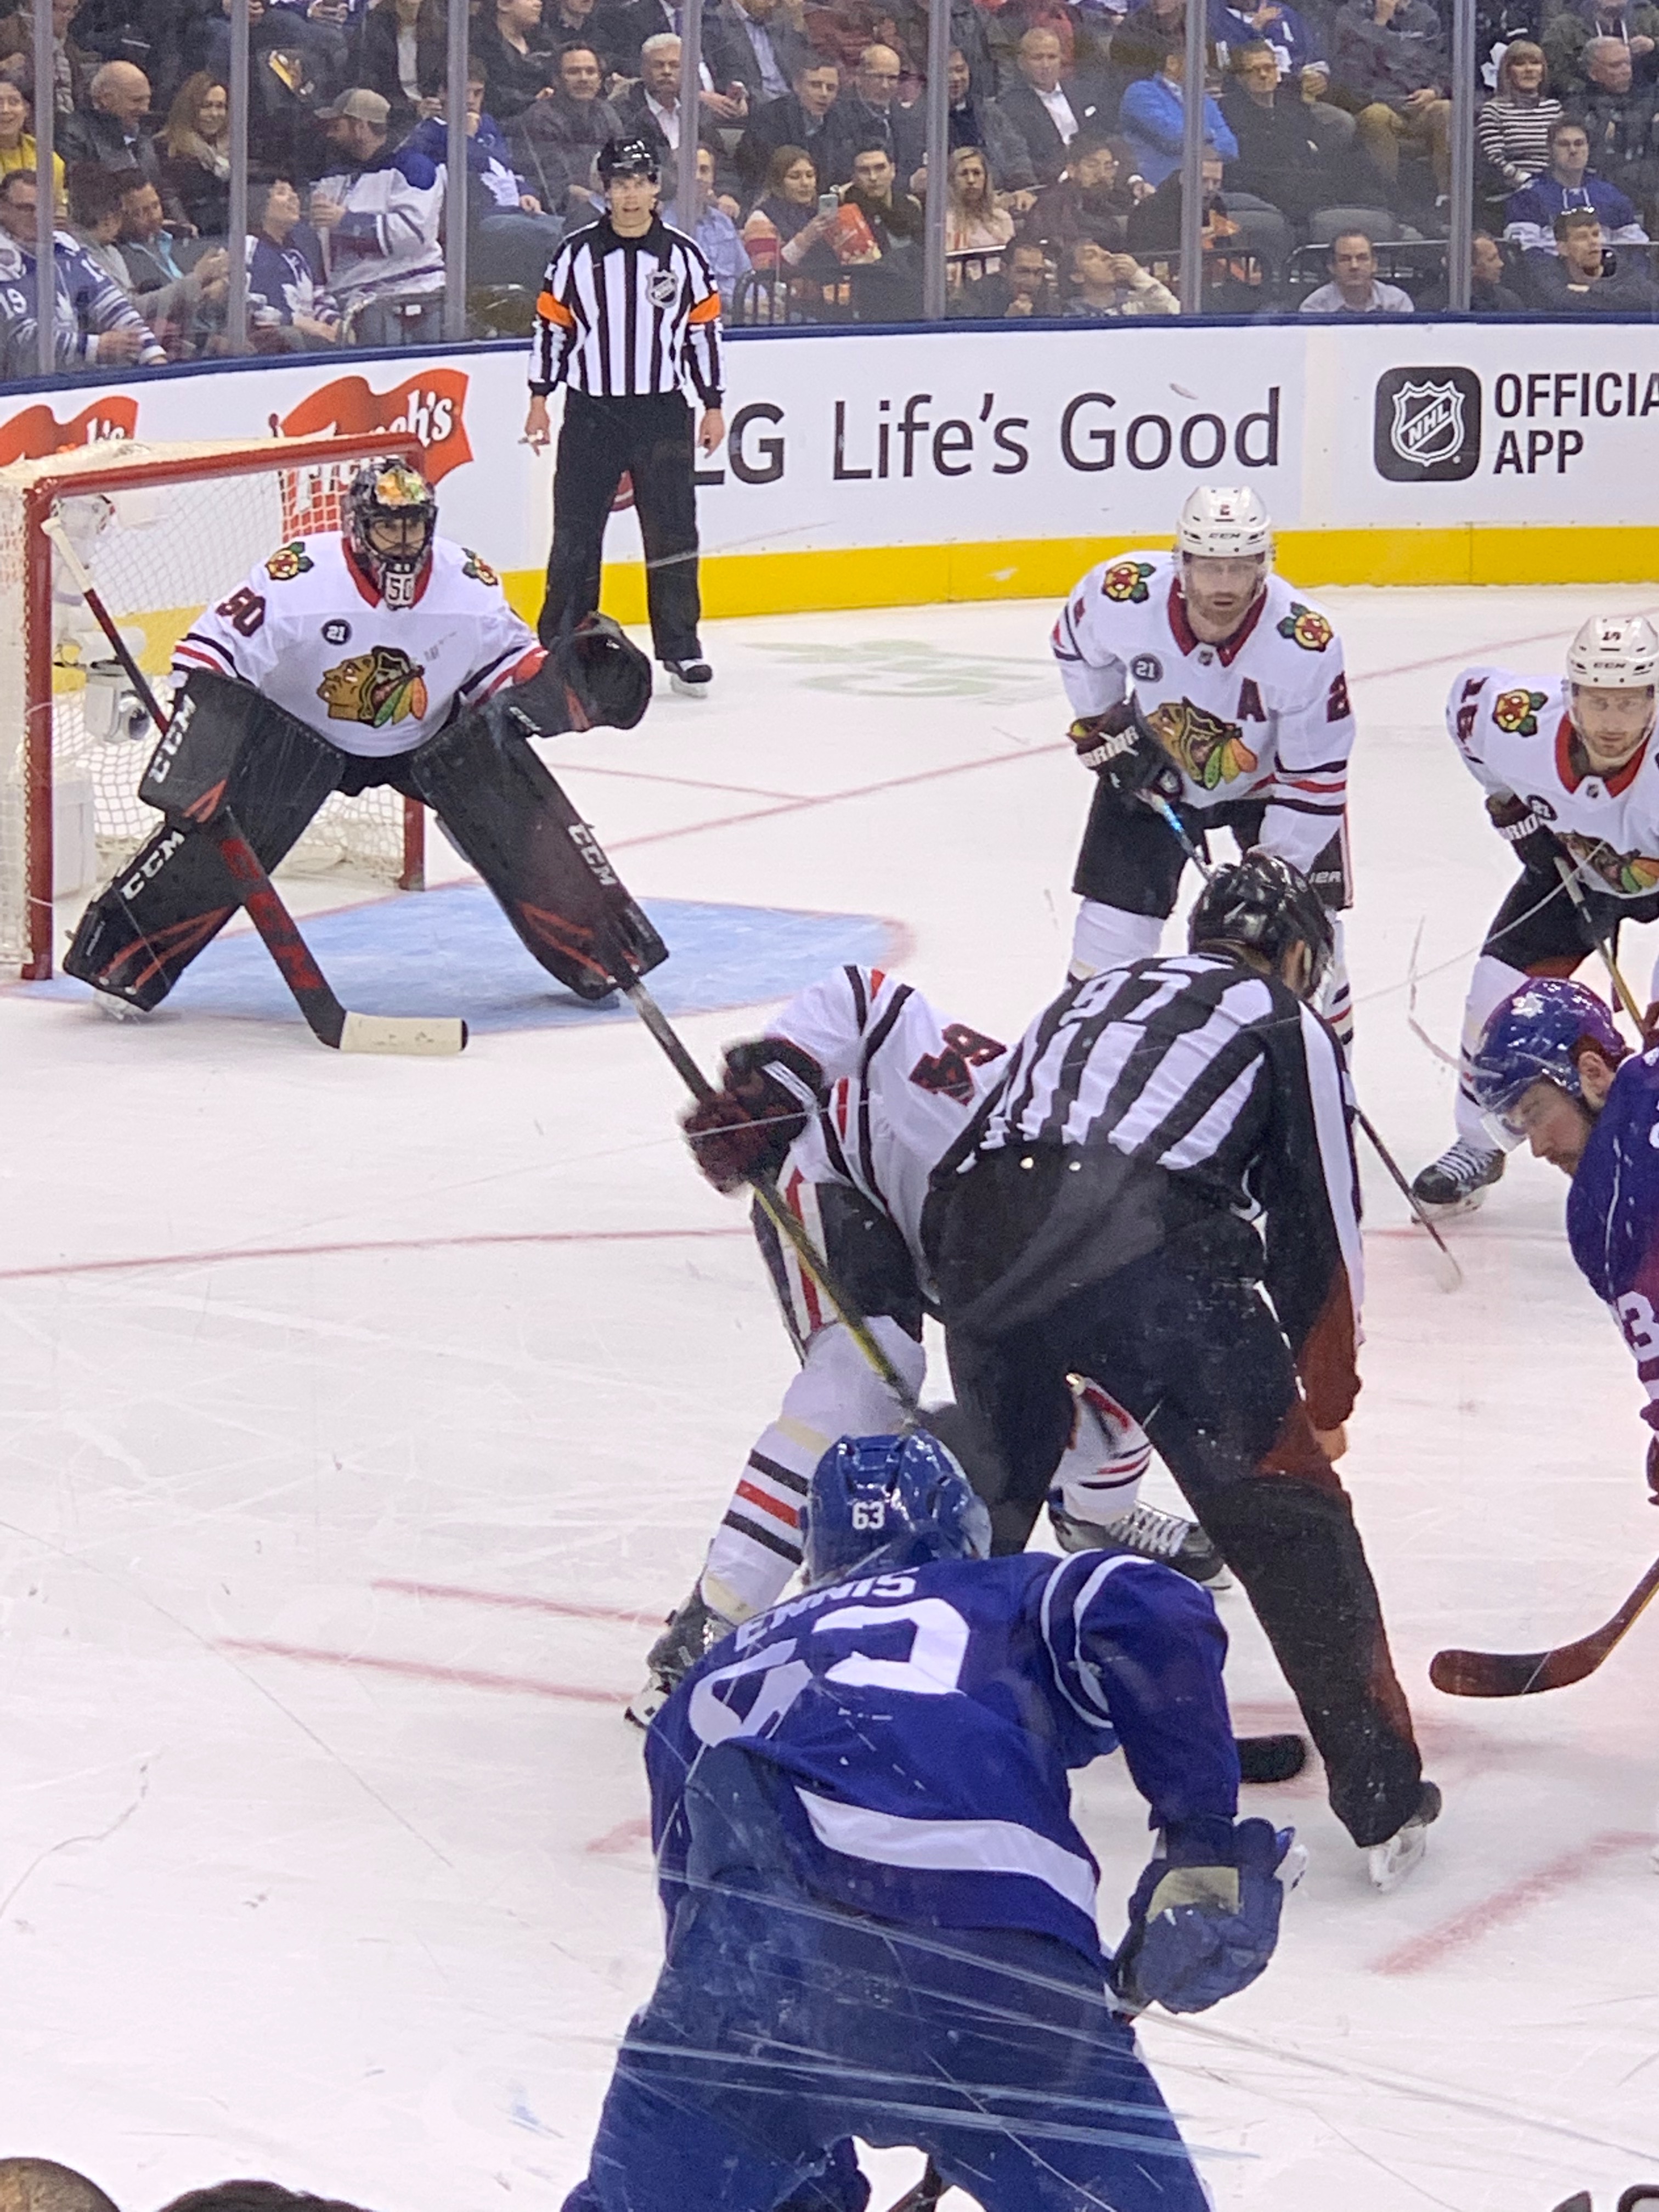 Toronto Maple Leafs and Chicago Blackhawks face-off